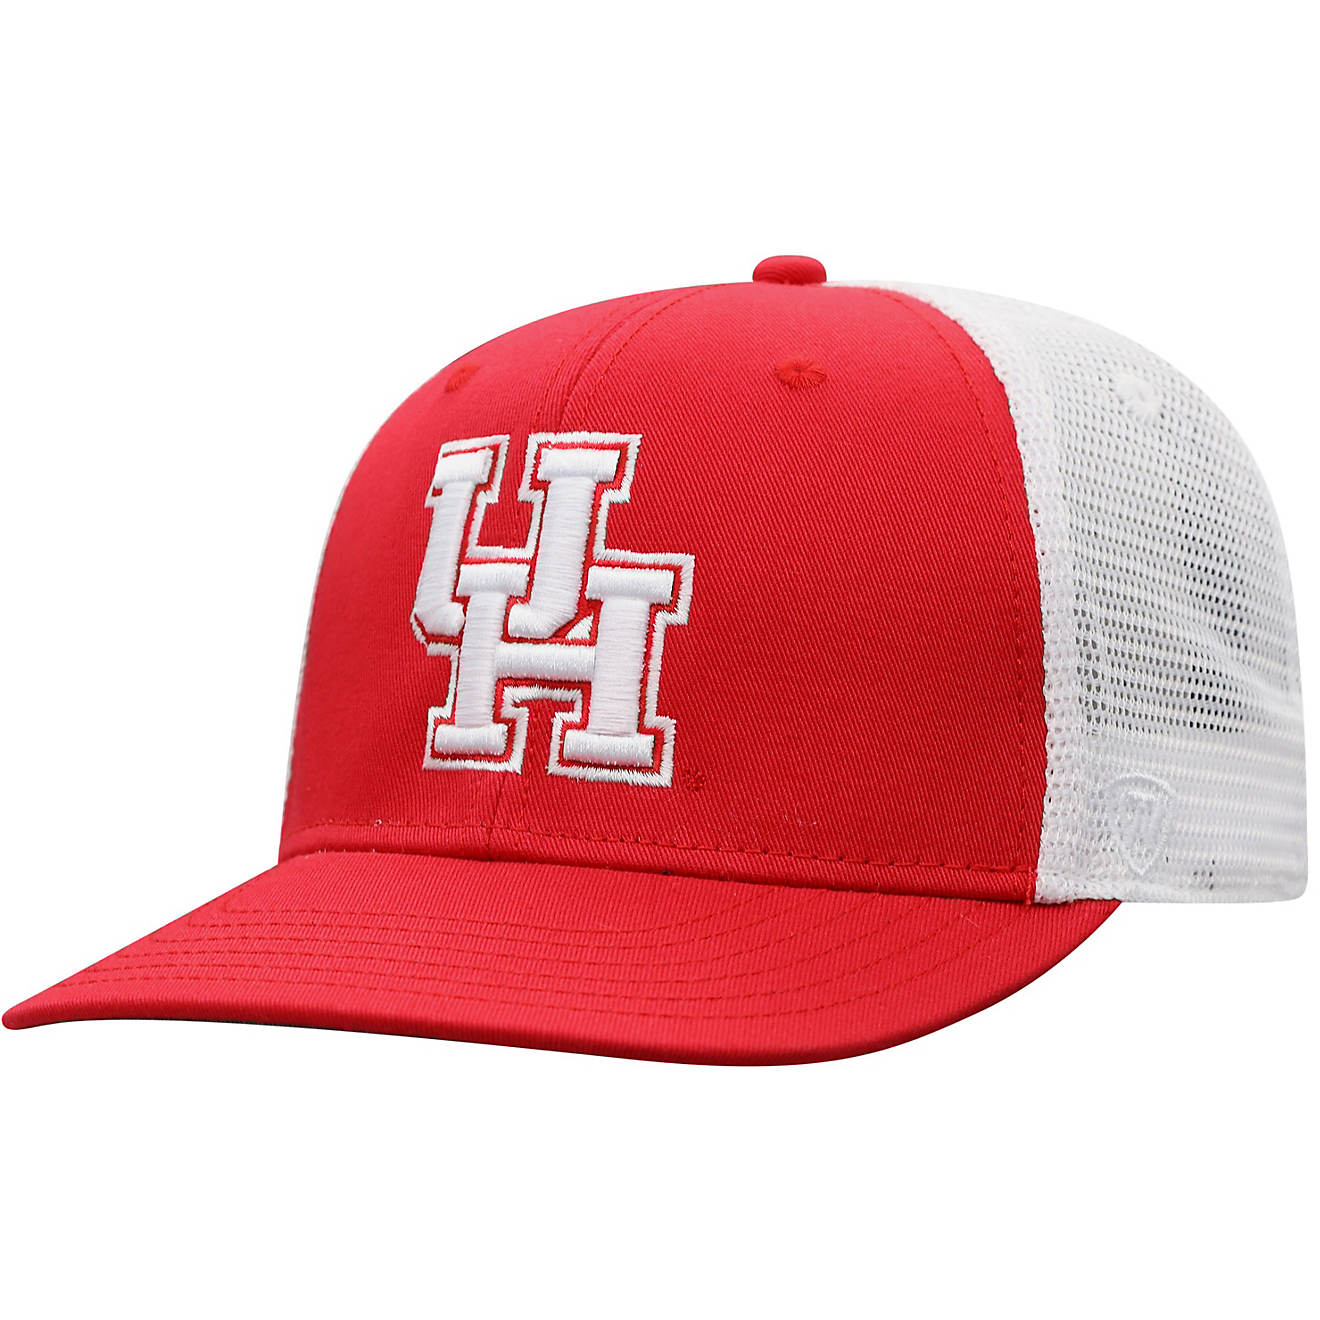 Top of the World Men's University of Houston BB 2-Tone Cap                                                                       - view number 1